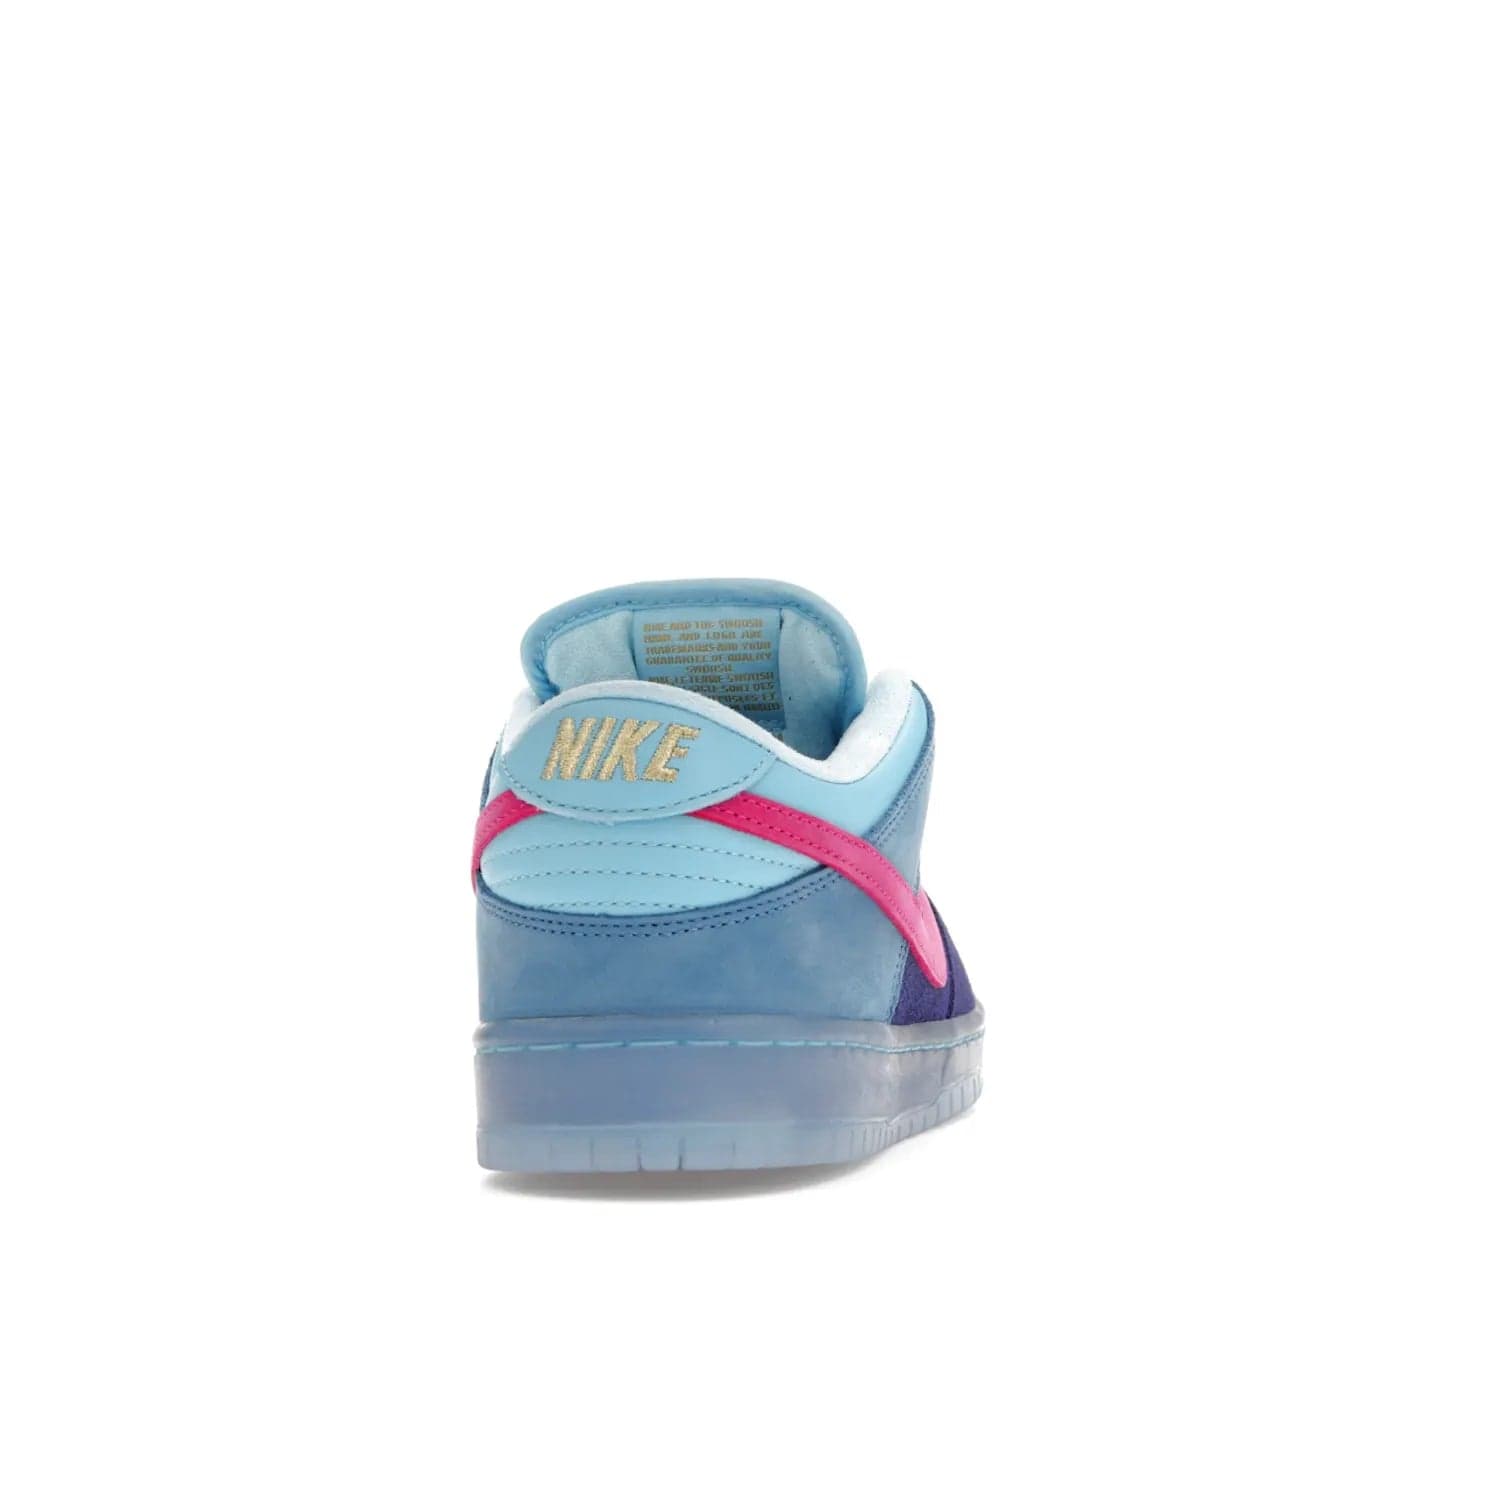 Nike SB Dunk Low Run The Jewels - Image 29 - Only at www.BallersClubKickz.com - The Nike SB Dunk Low Run The Jewels pays tribute to the Run the Jewels 3 album cover. It features a blue suede upper with pink suede accents, gold branding and 3 lace sets. RTJ insoles complete this limited edition sneaker. Get it now for your shoe collection.